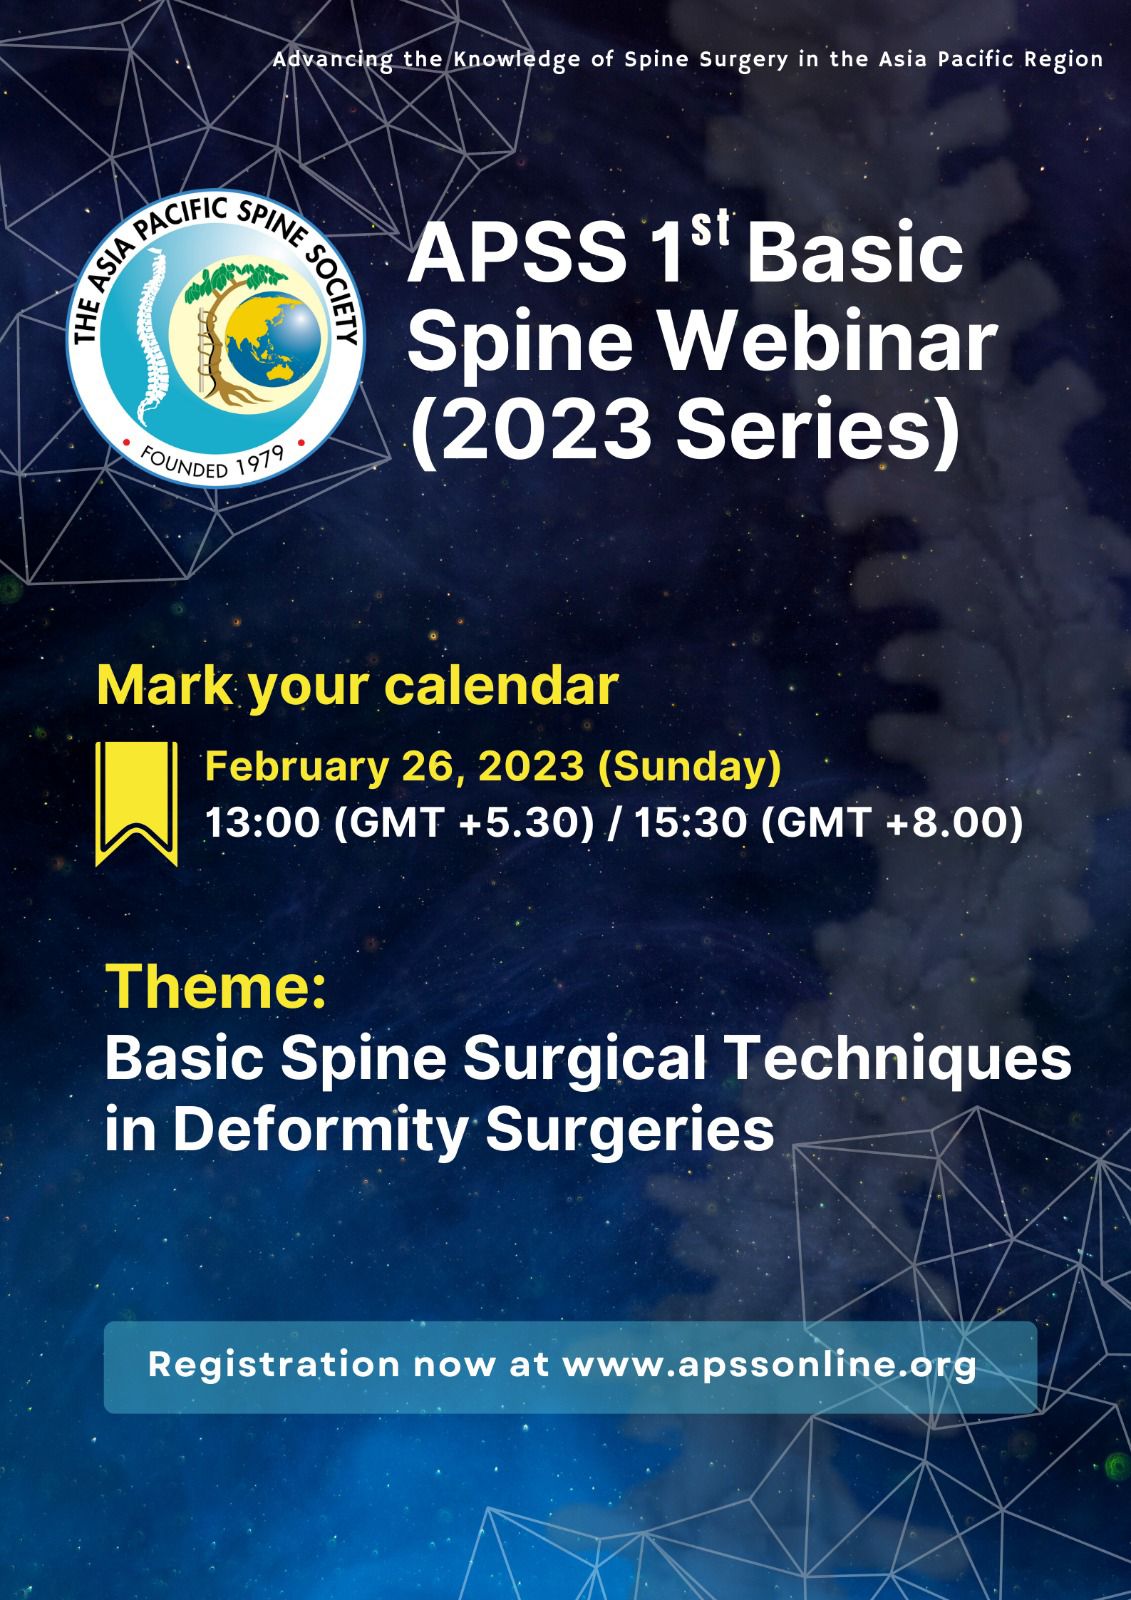 APSS 1St BasicSpine Webinar (2023 Series) Basic Spine Surgical Techniques in Deformity Surgeries